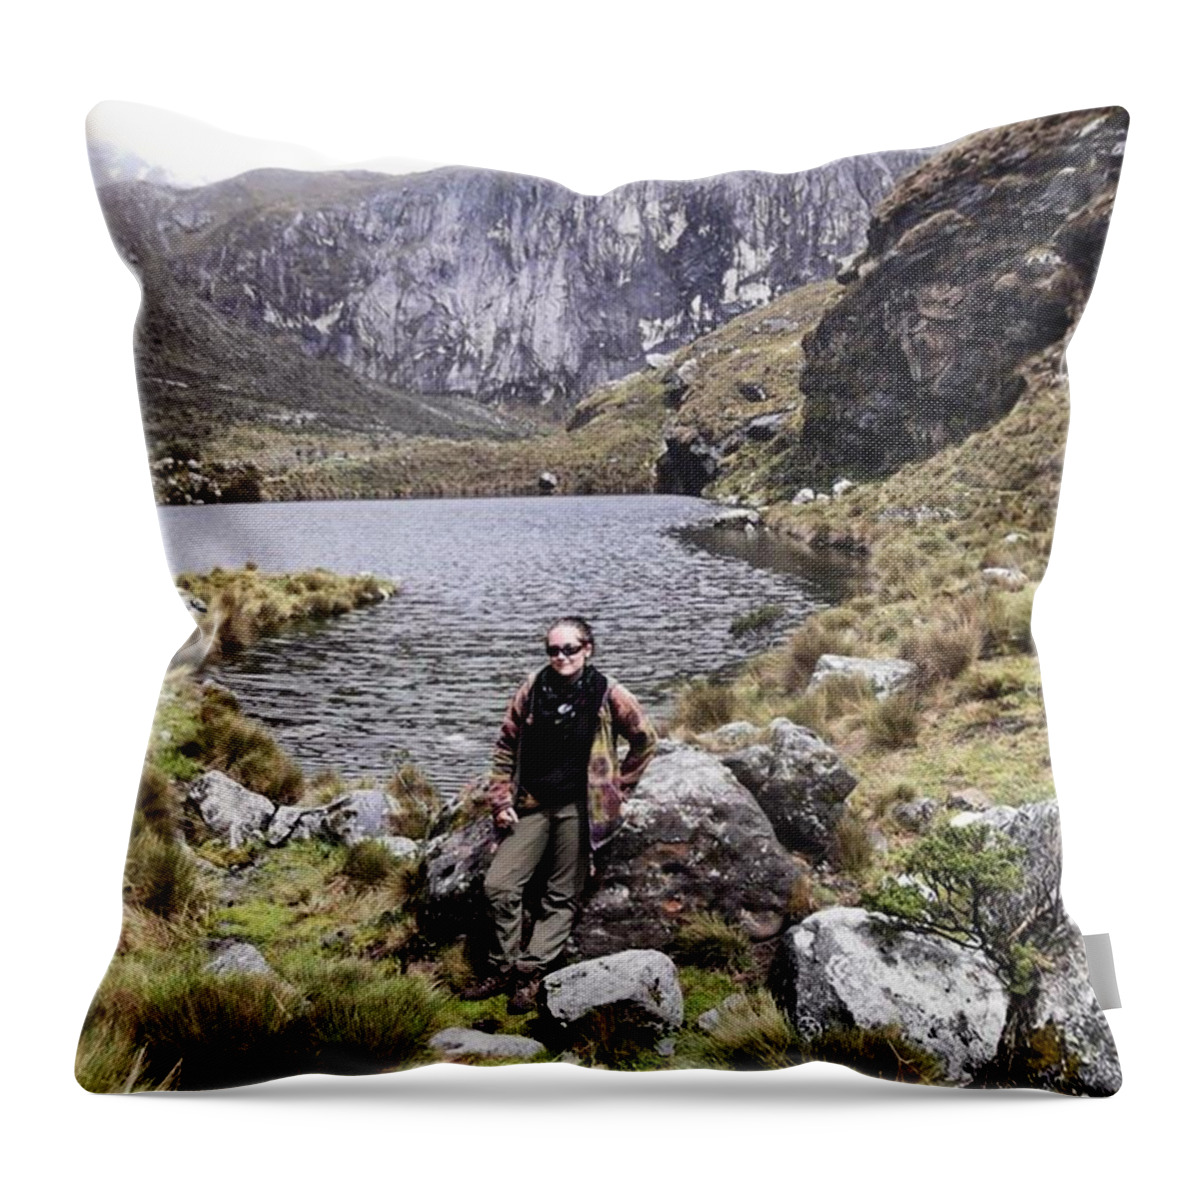 Mountains Throw Pillow featuring the photograph Taking A Breather While Hiking Up In by Charlotte Cooper